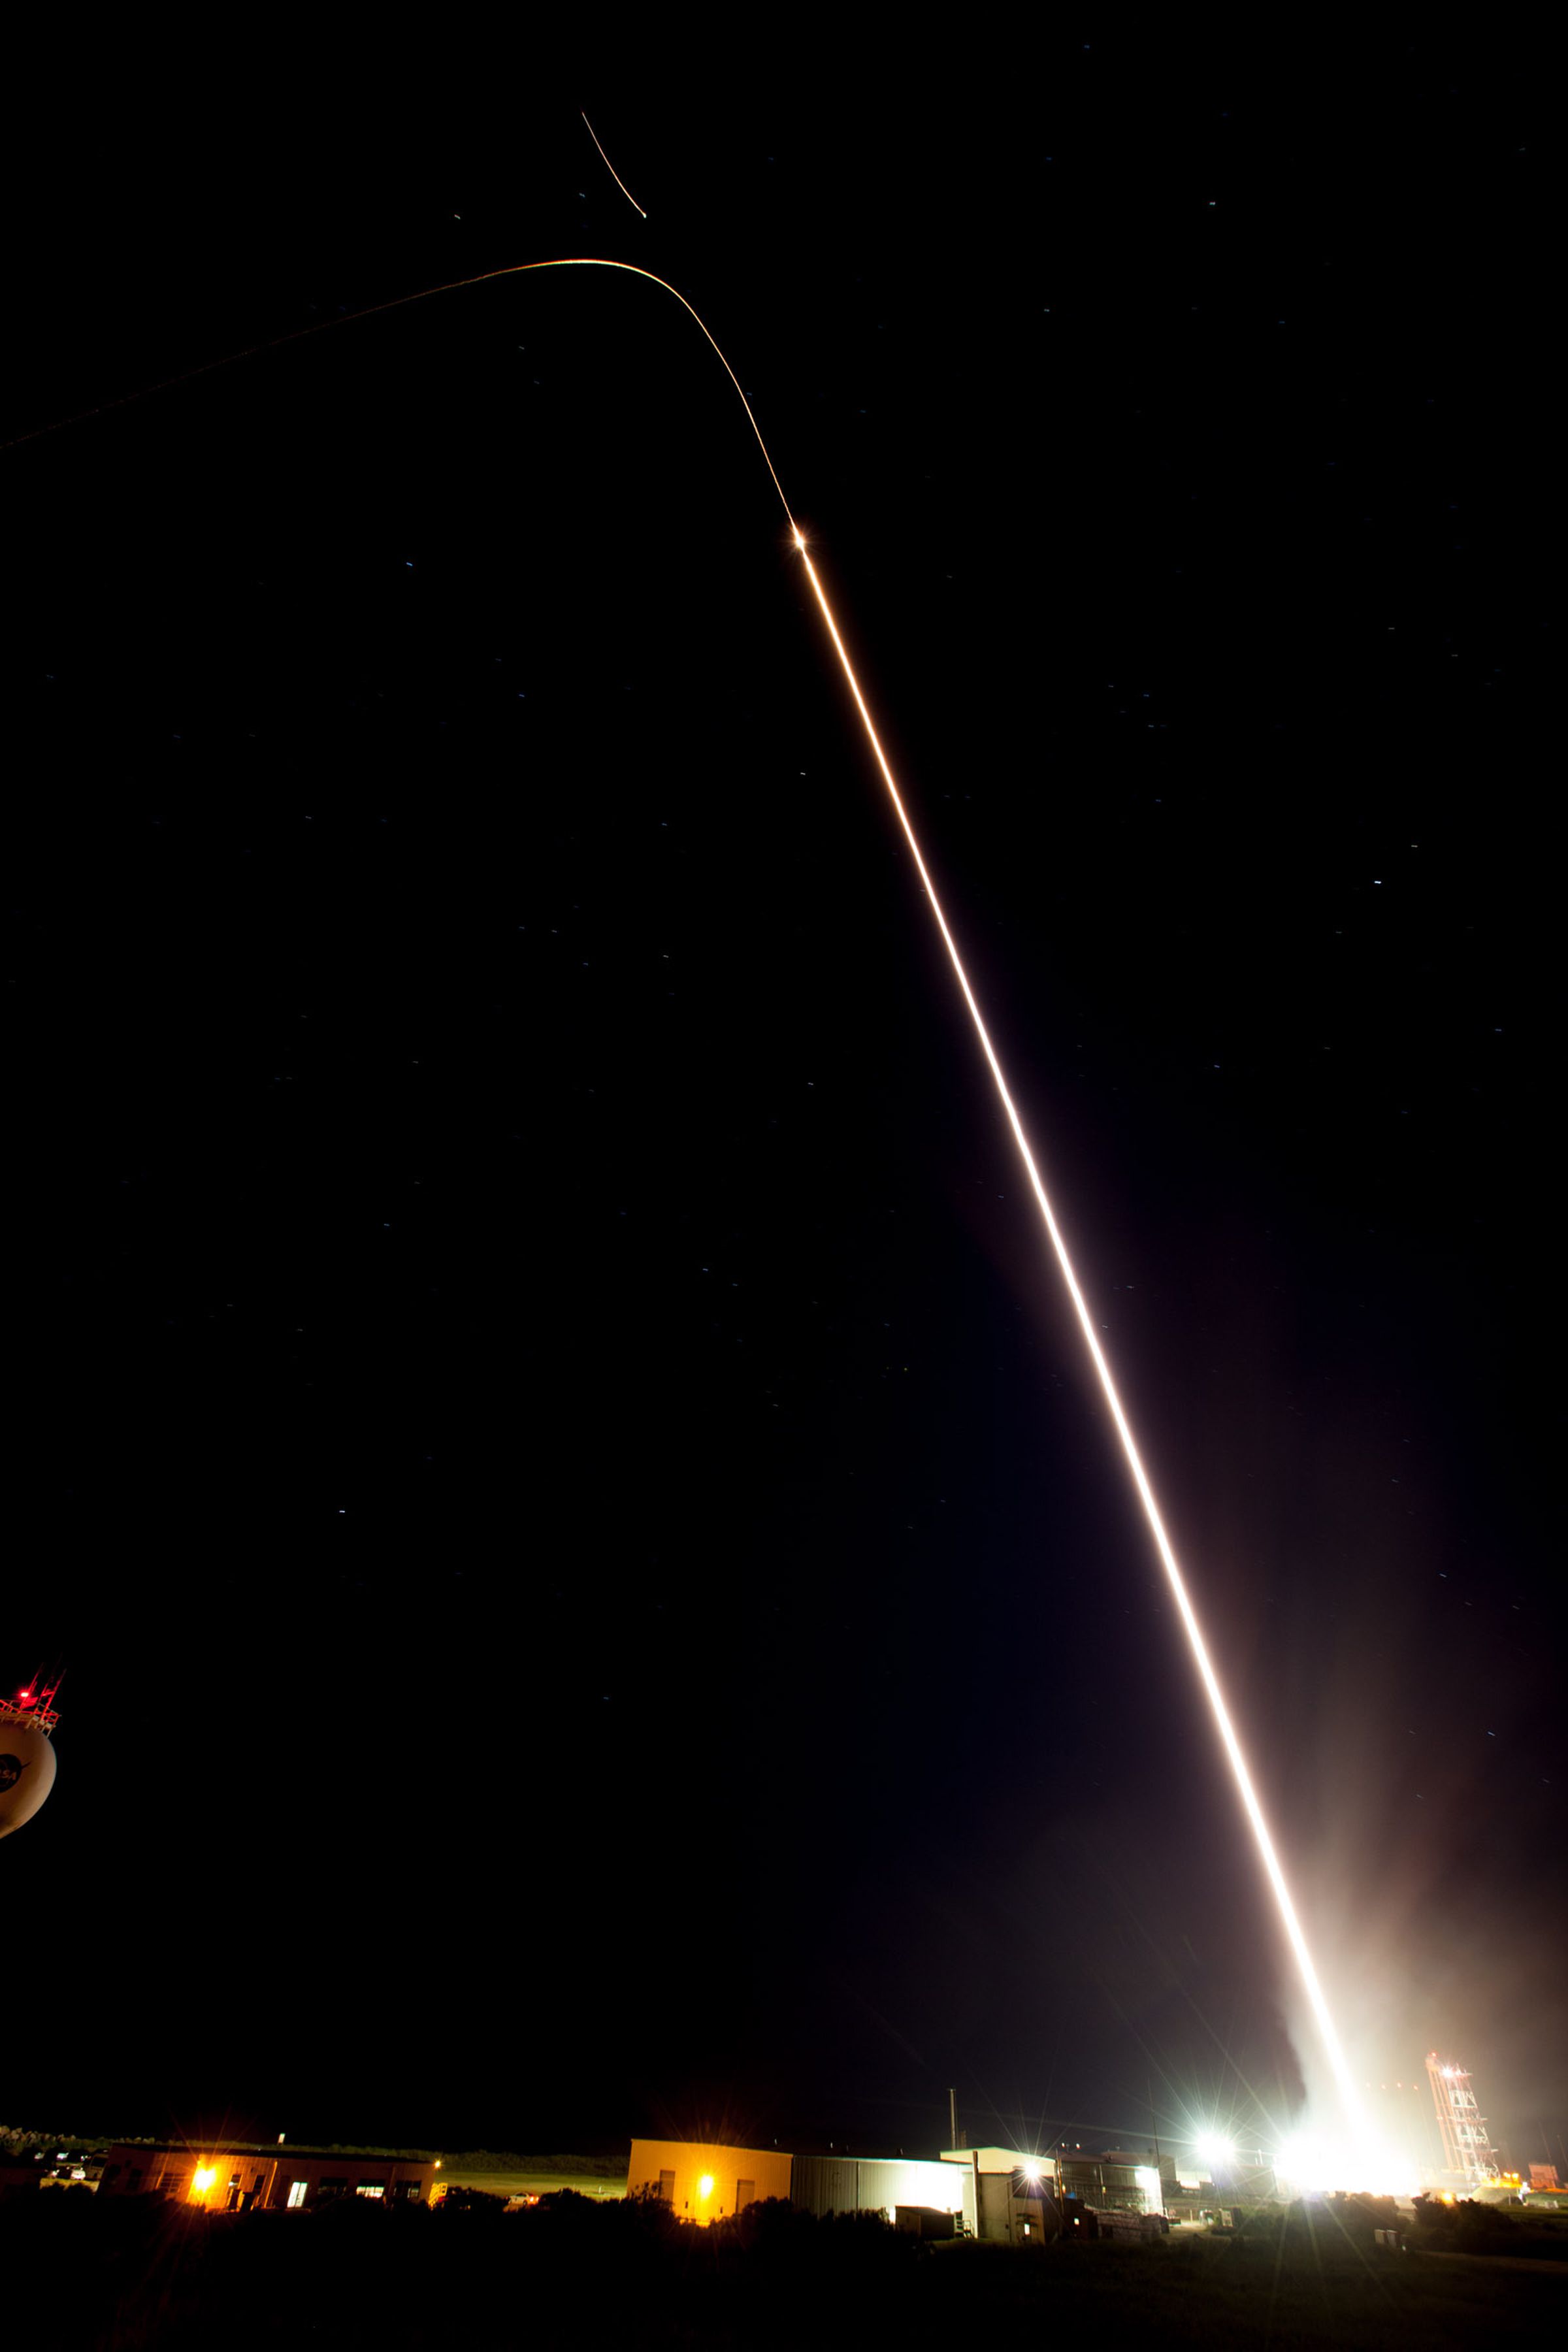 A long exposure shot of the launch.